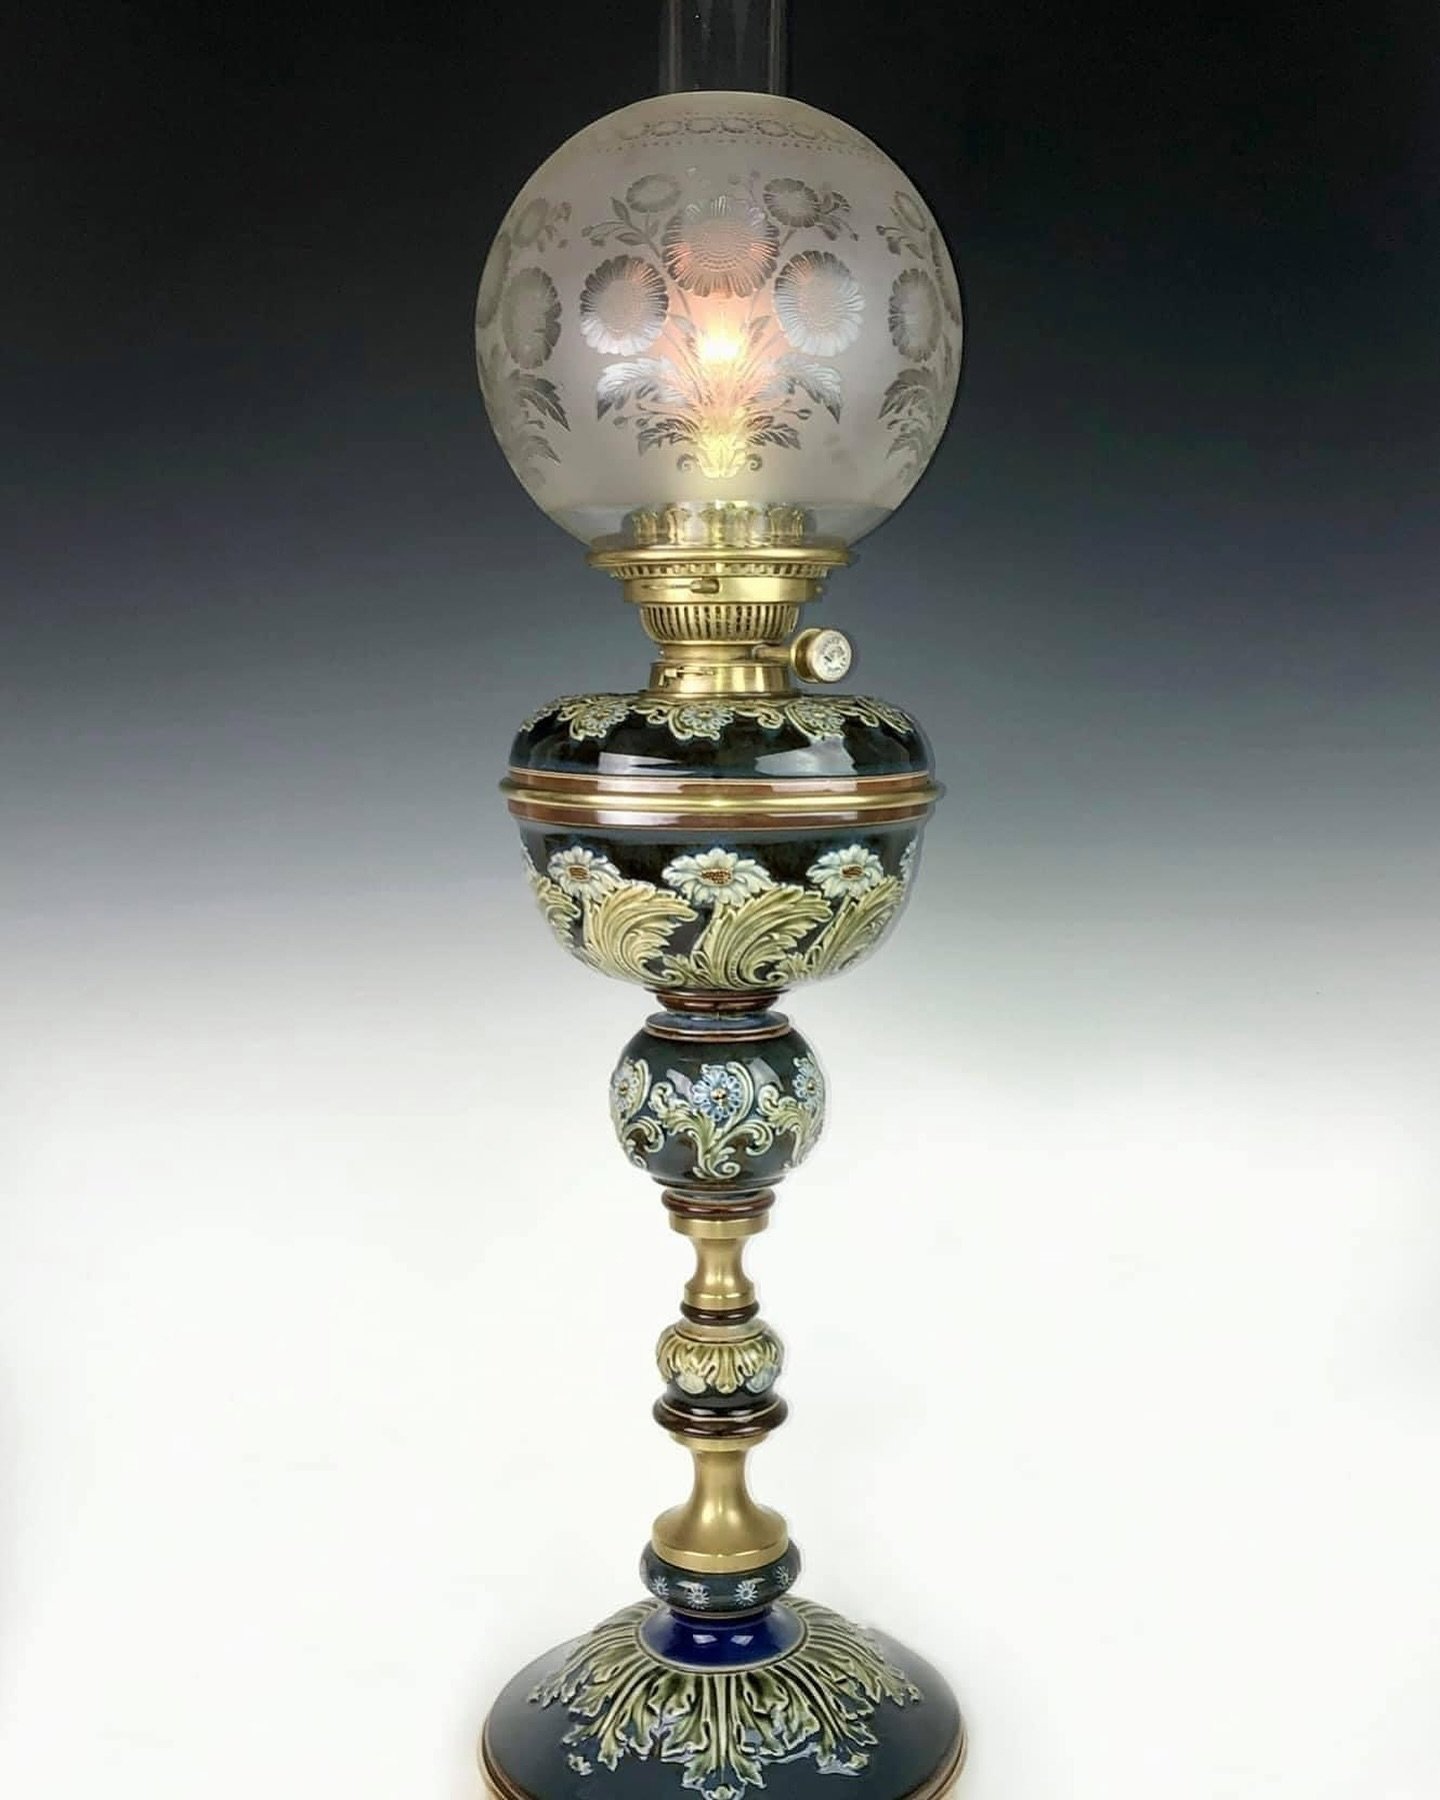 Banquet &ldquo;daisies&rdquo; oil lamp by Doulton &amp; Co. Each glazed ceramic section was hand-sculpted by artist Joan Honey.  33 inches tall. Lambeth, England circa 1890.

The Drake Hall Collection